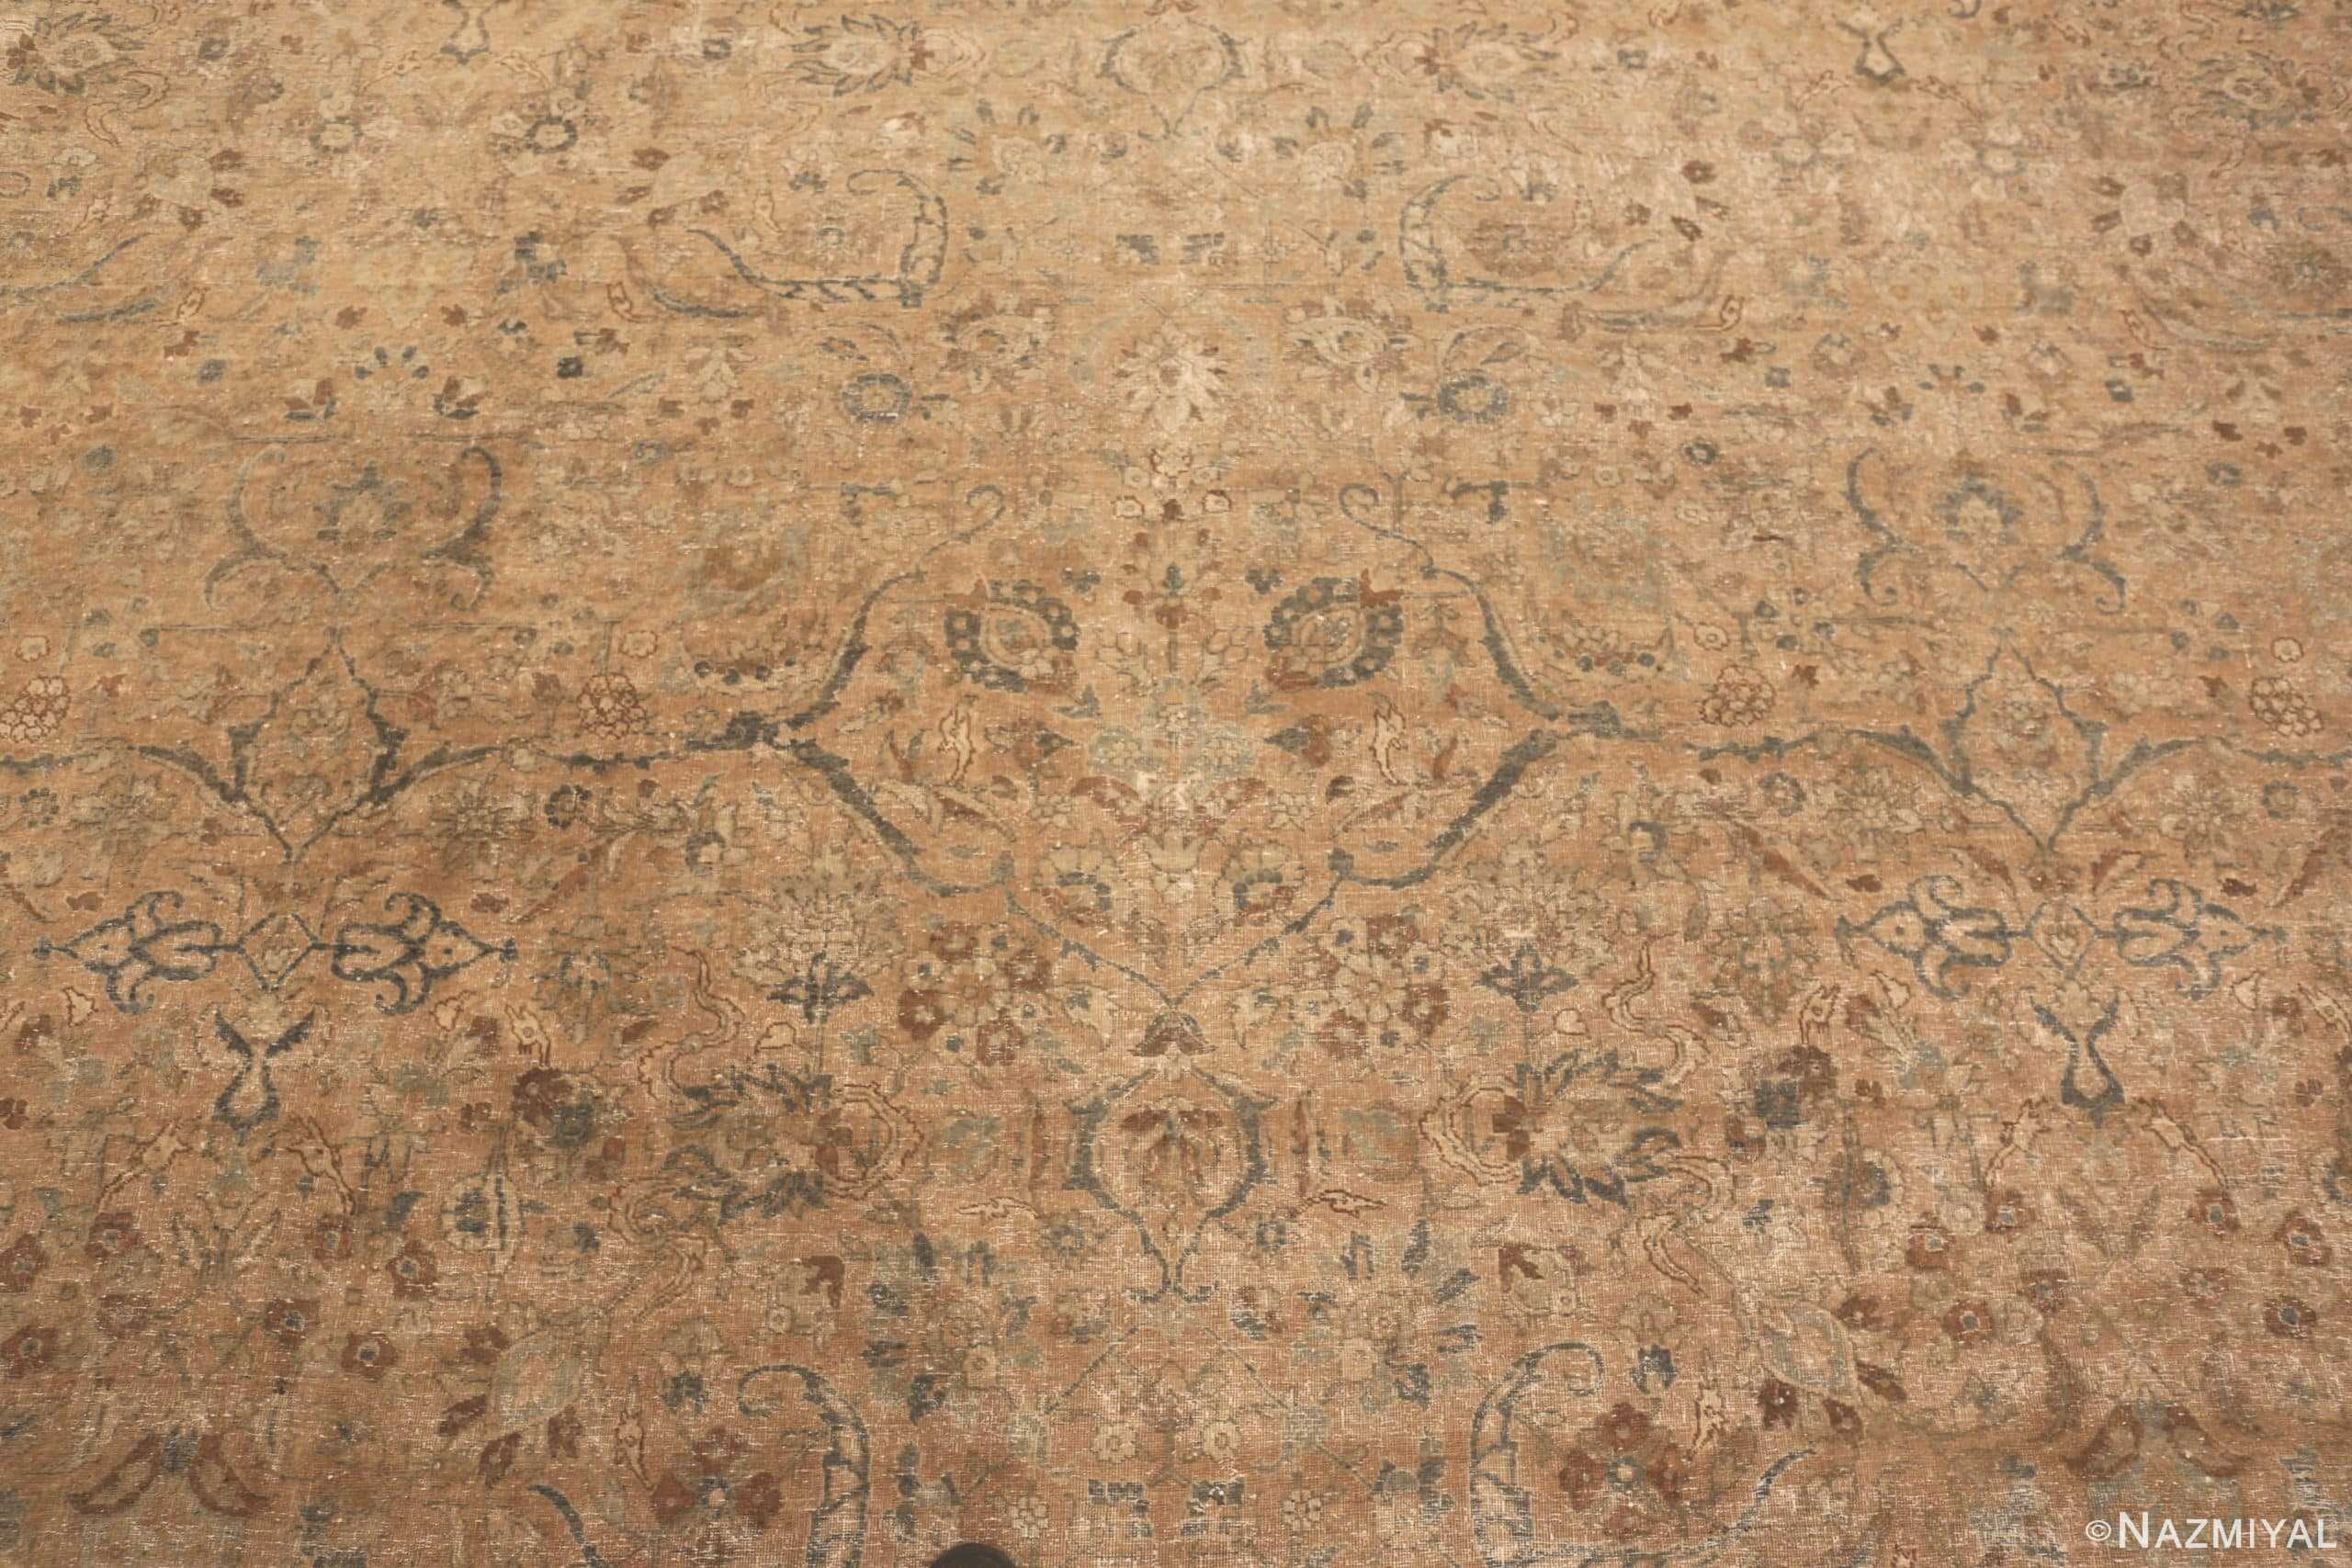 Detailed Of Antique Persian Floral Tabriz Rug 70956 by Nazmiyal Antique Rugs